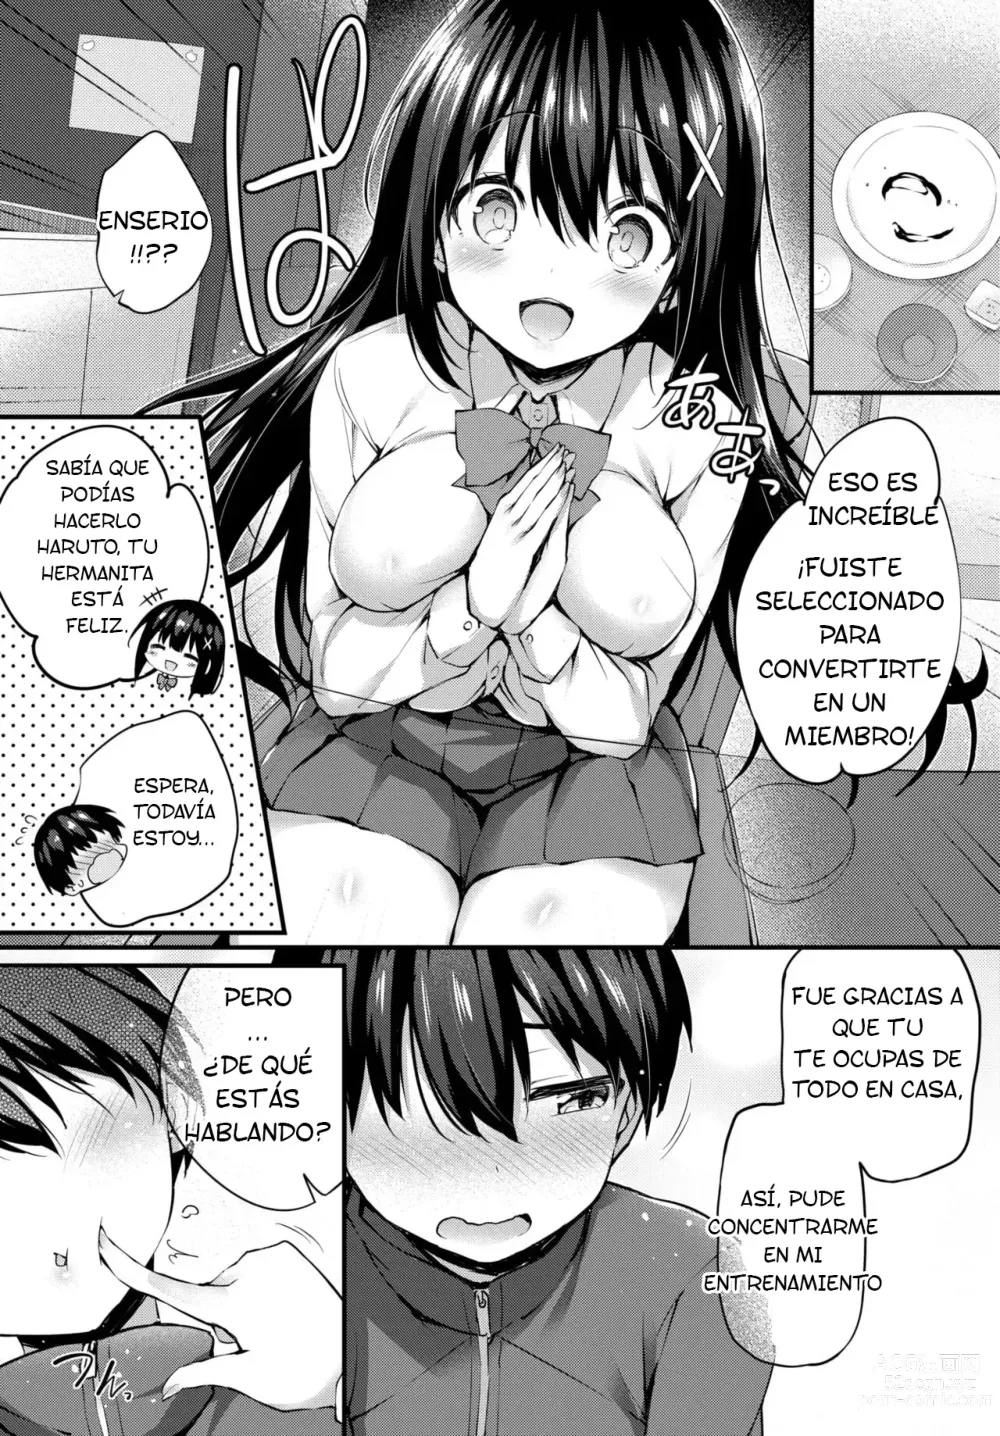 Page 2 of manga Boku no Onee-chan - My beloved was defiled and taken from me...